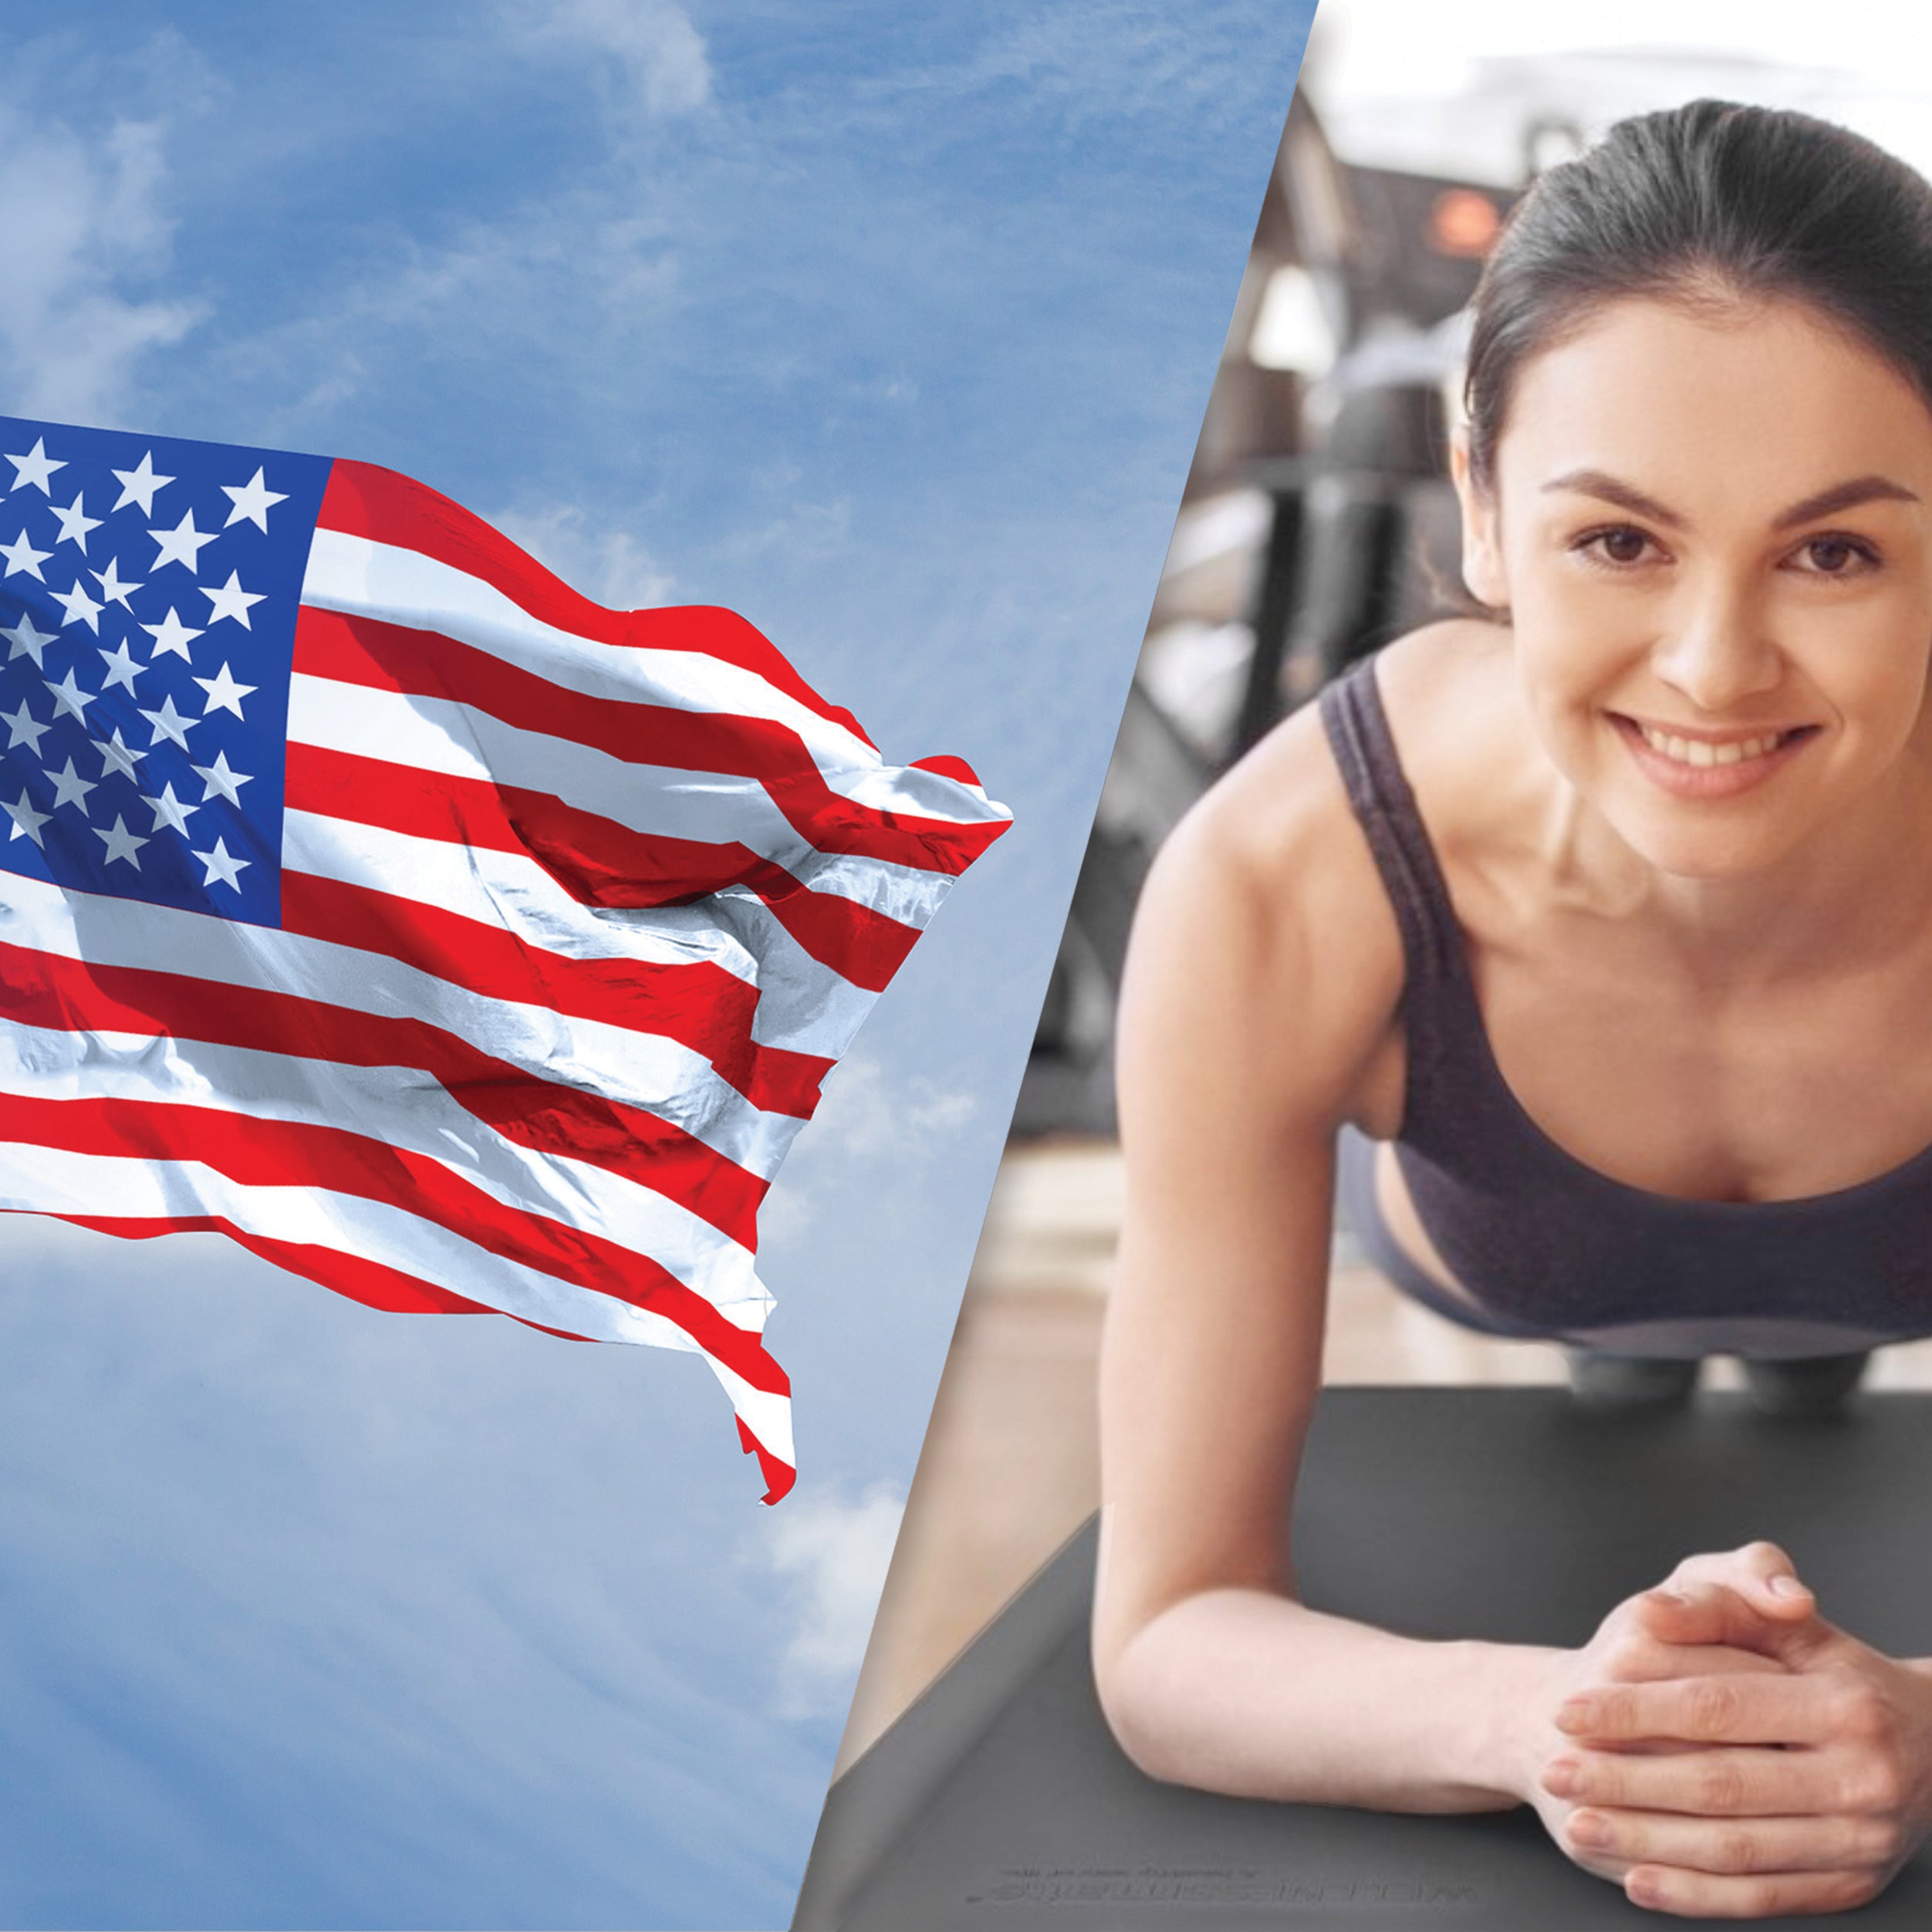 Woman doing planks on FitnessMat and American Flag